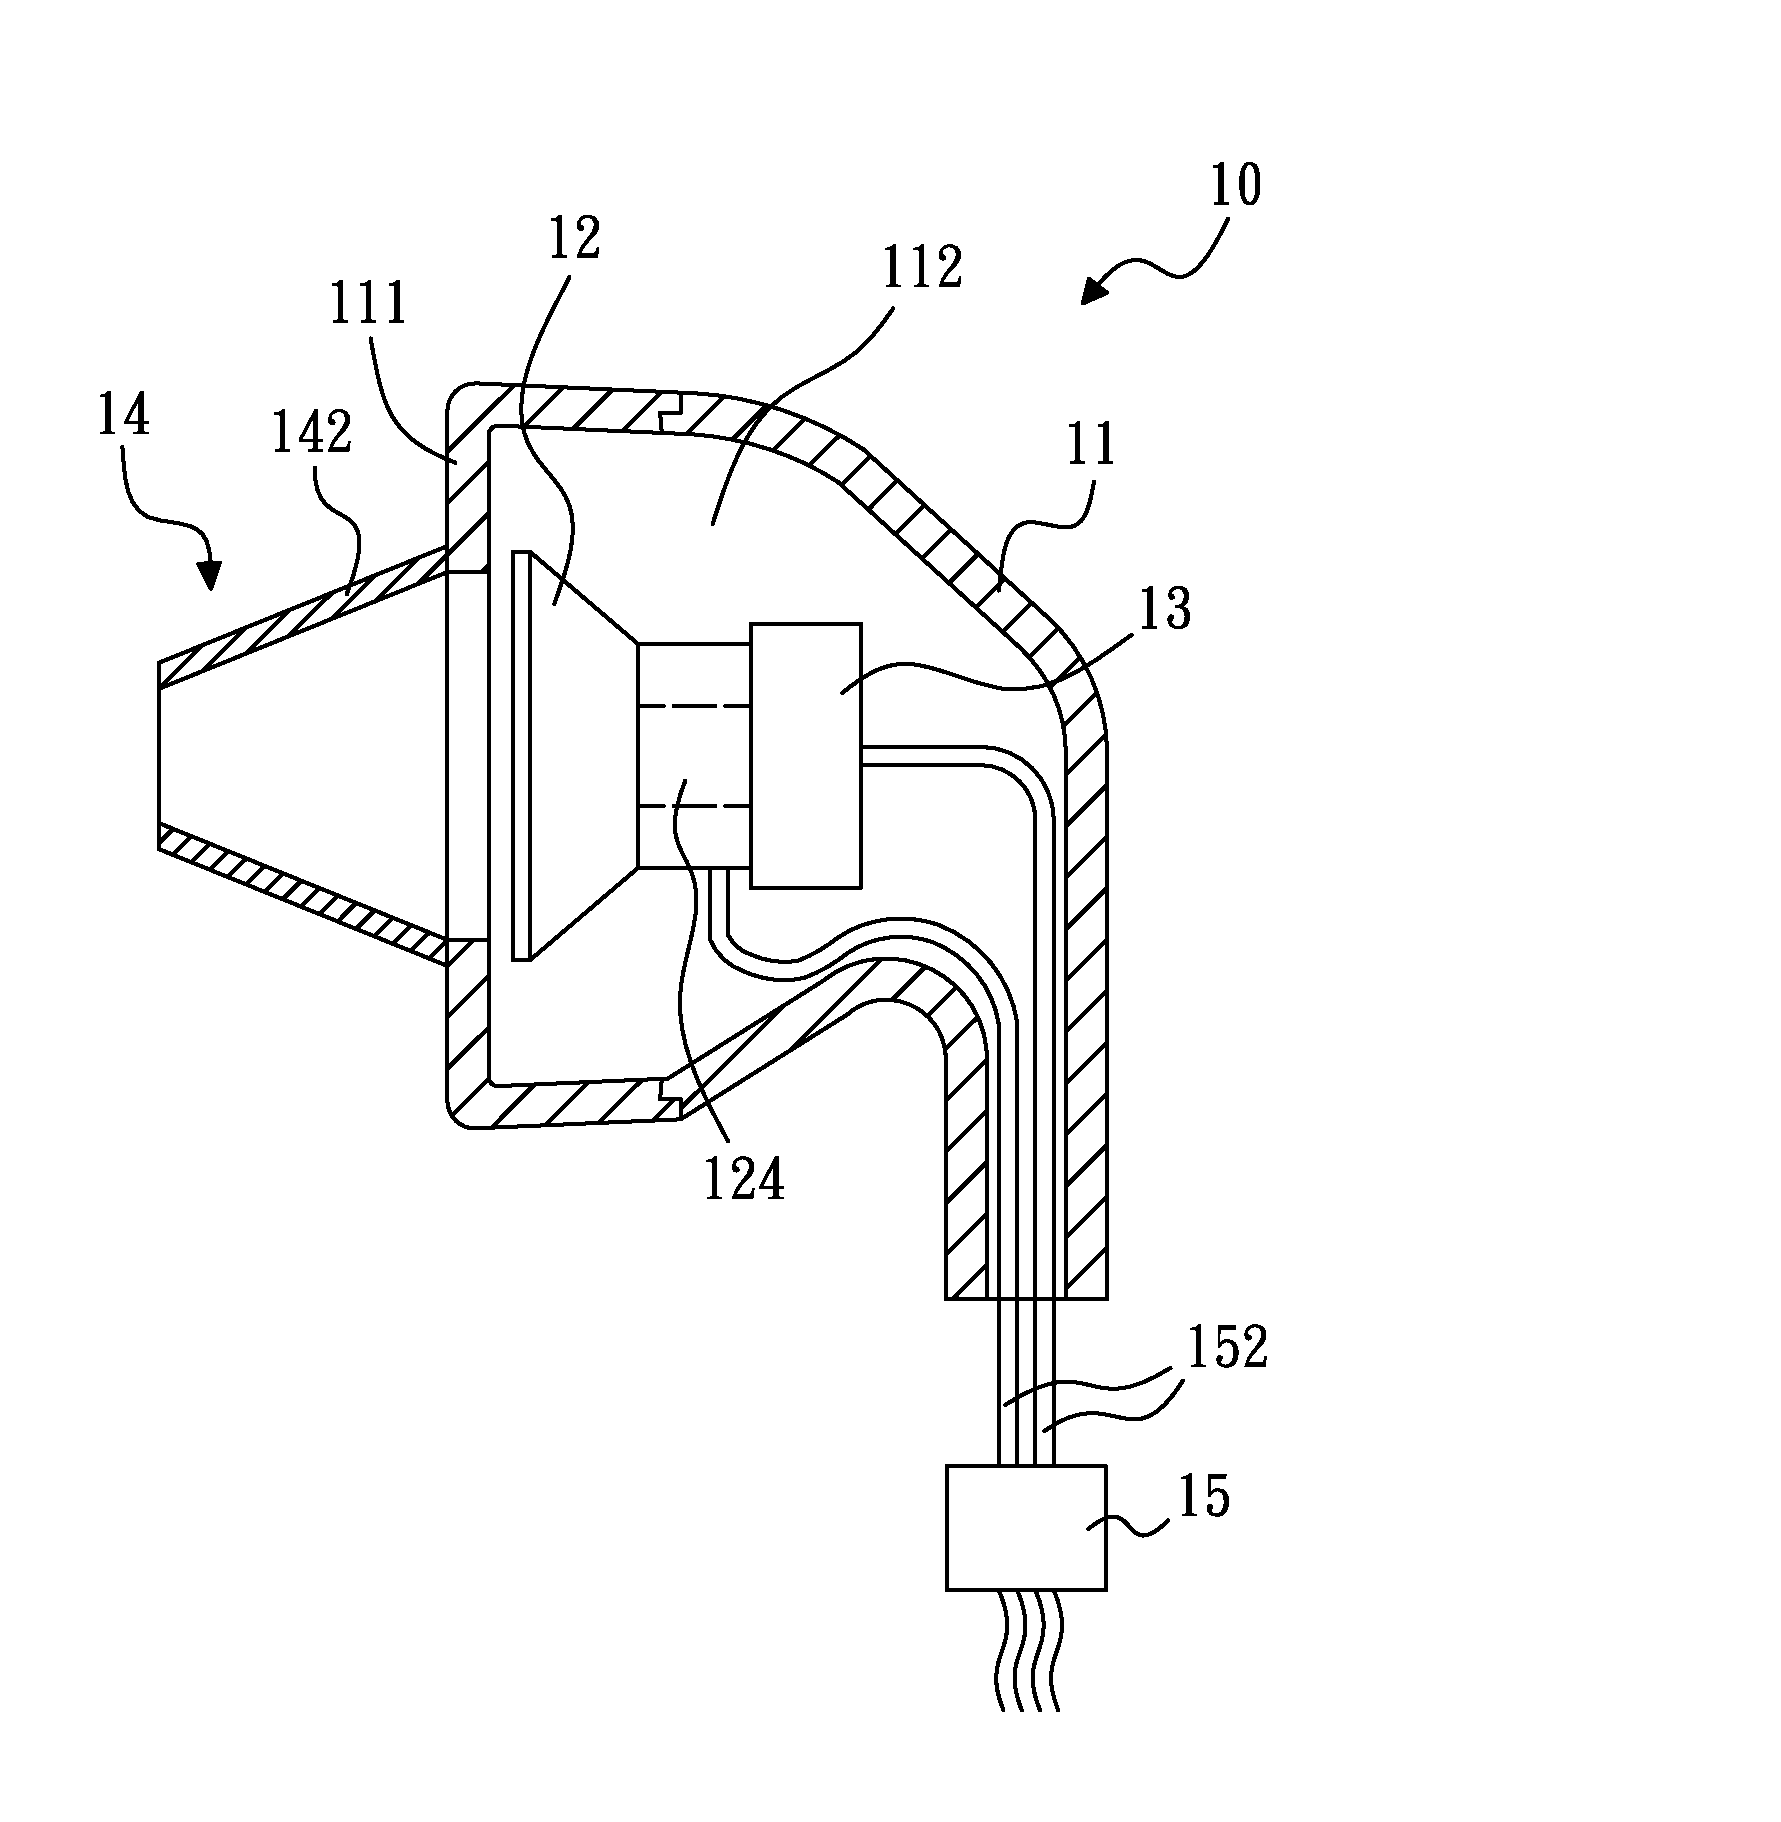 Earpiece device with microphone